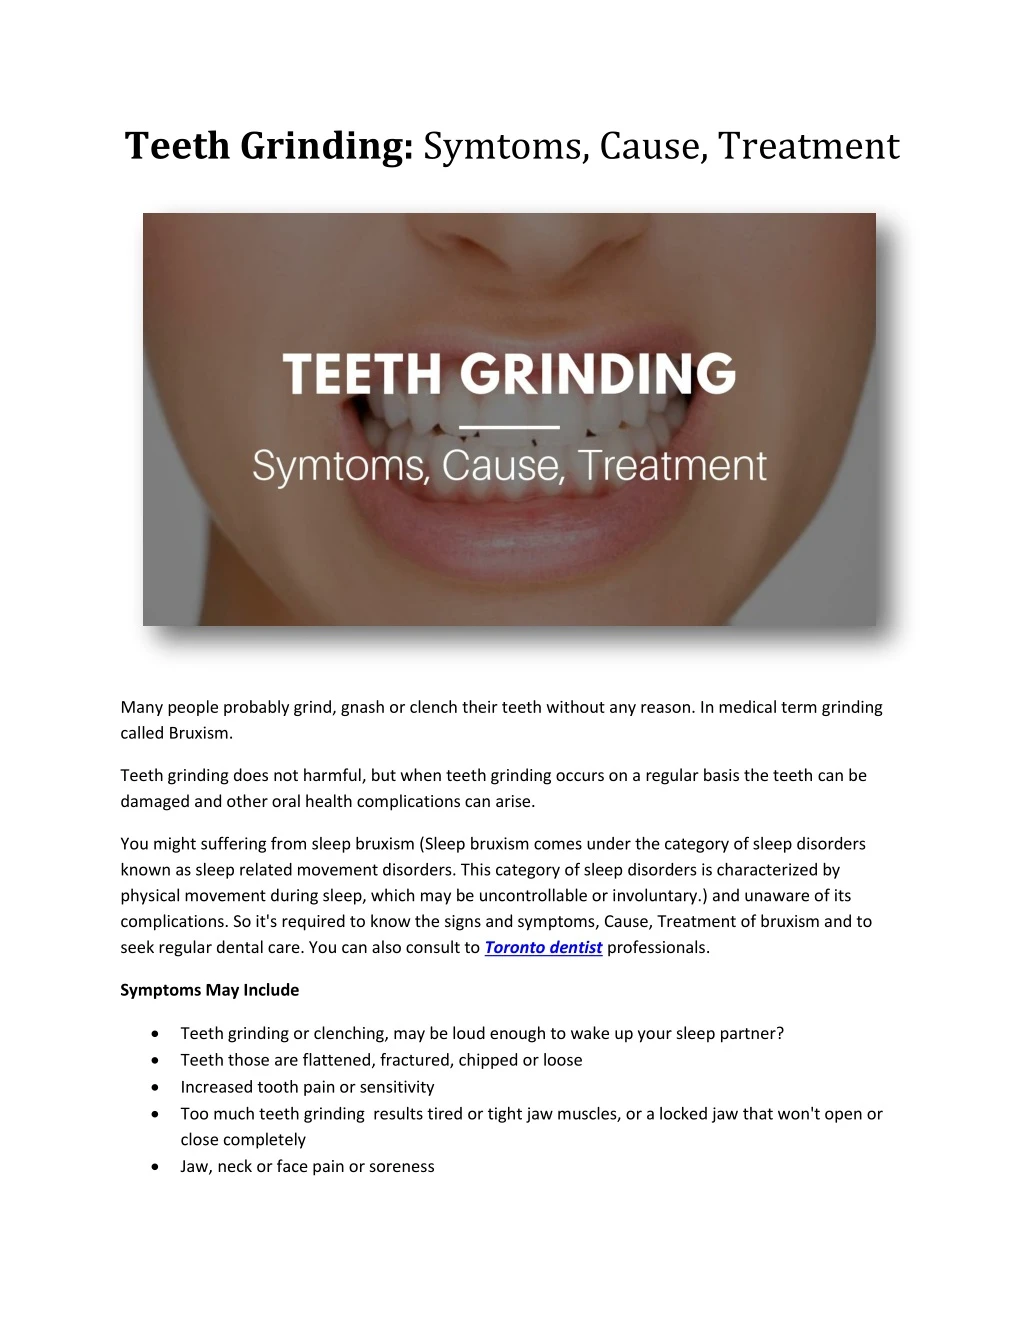 teeth grinding symtoms cause treatment